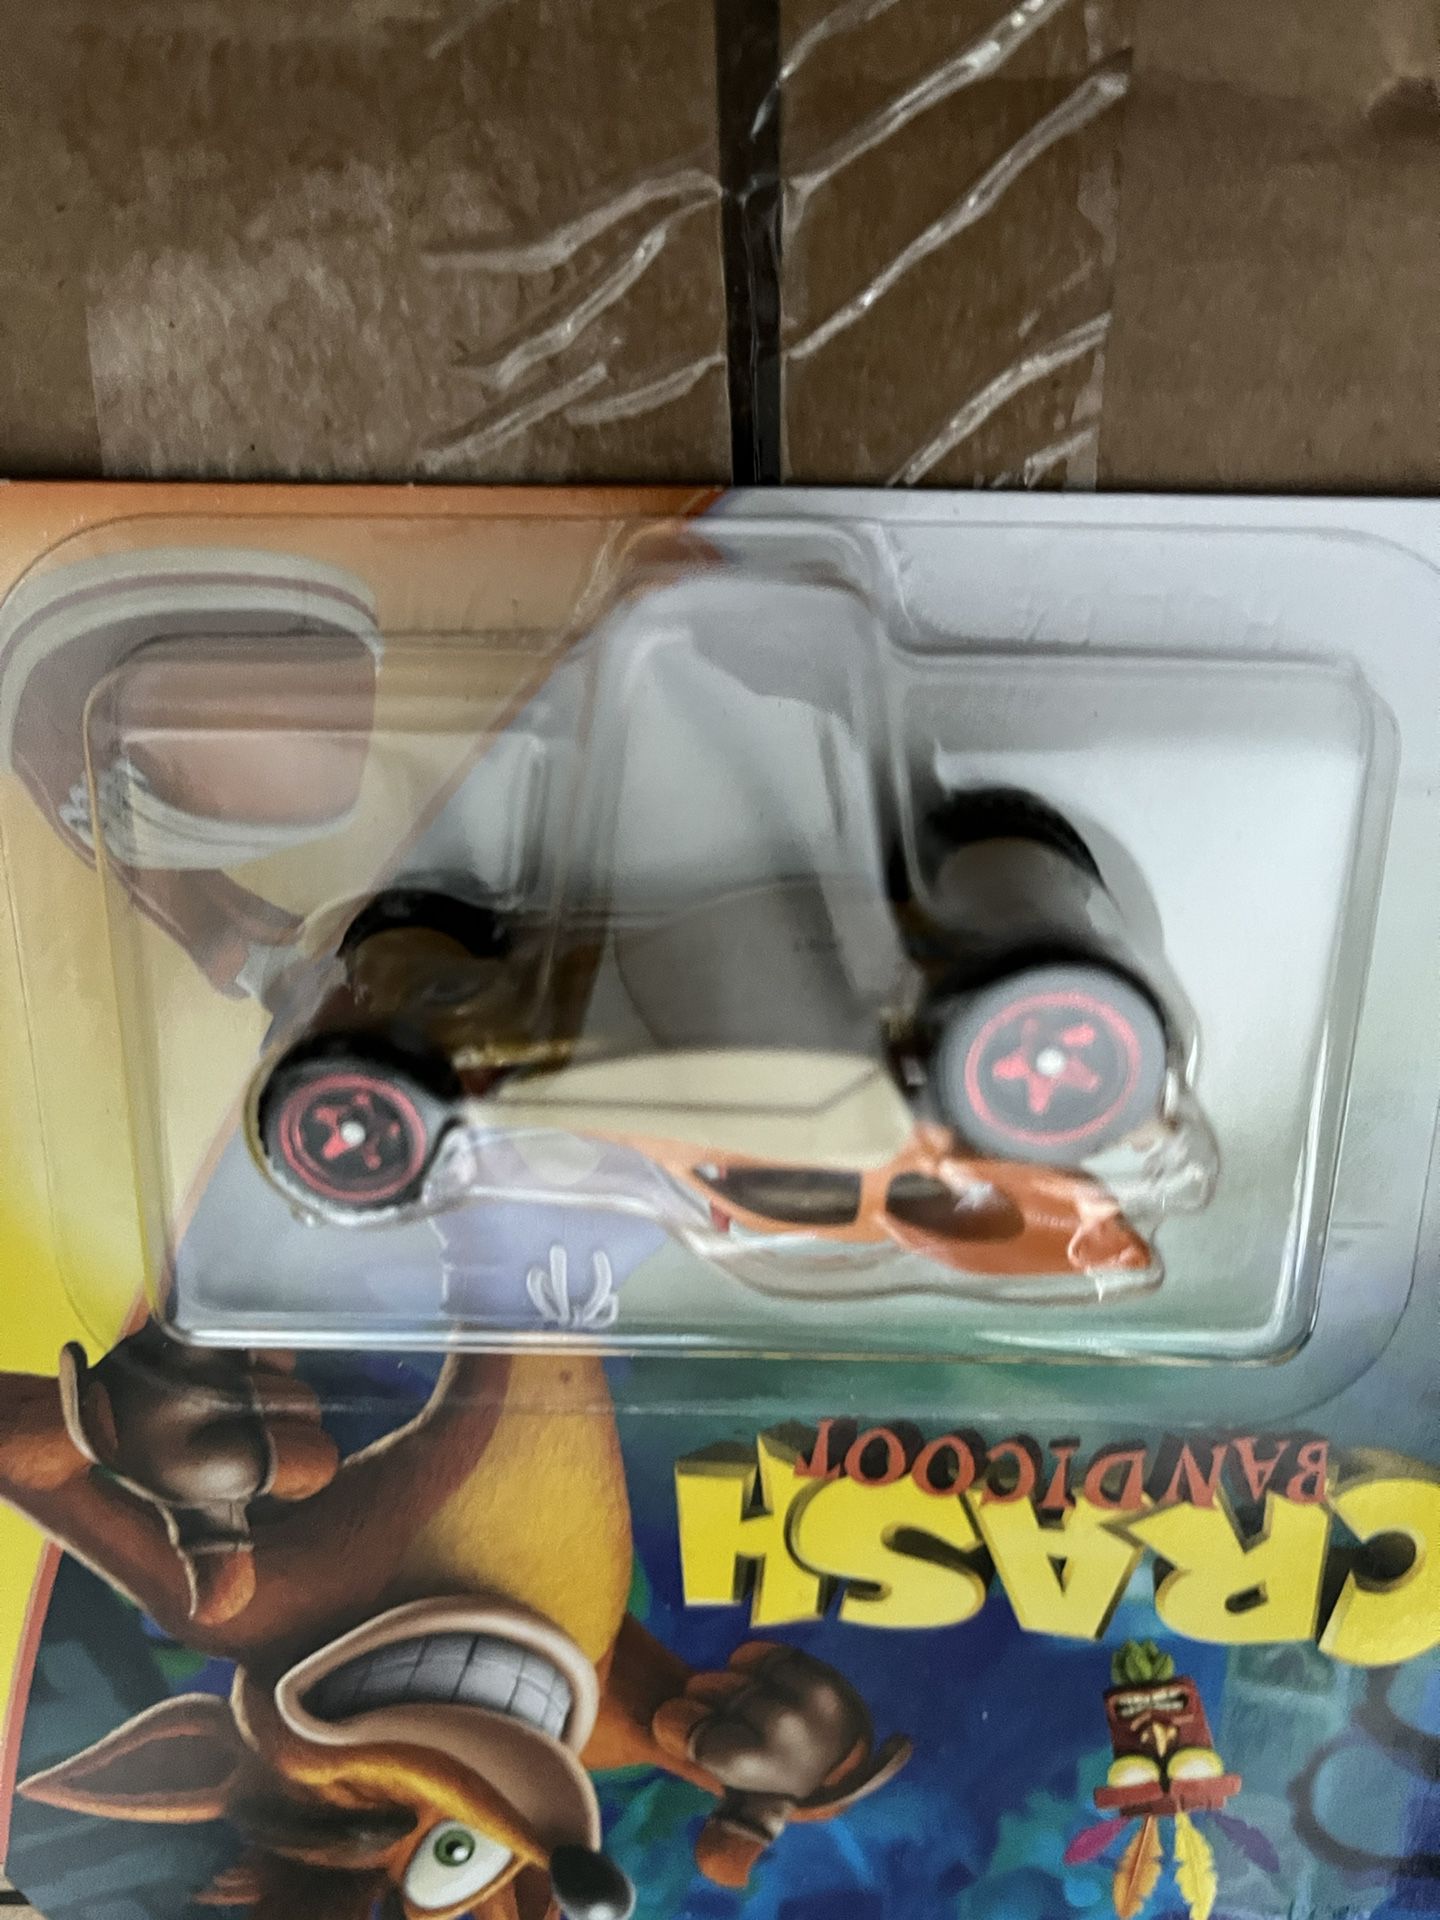 Hot Wheels Crash Bandicoot Character Car, 1:64 Scale Toy Collectible 